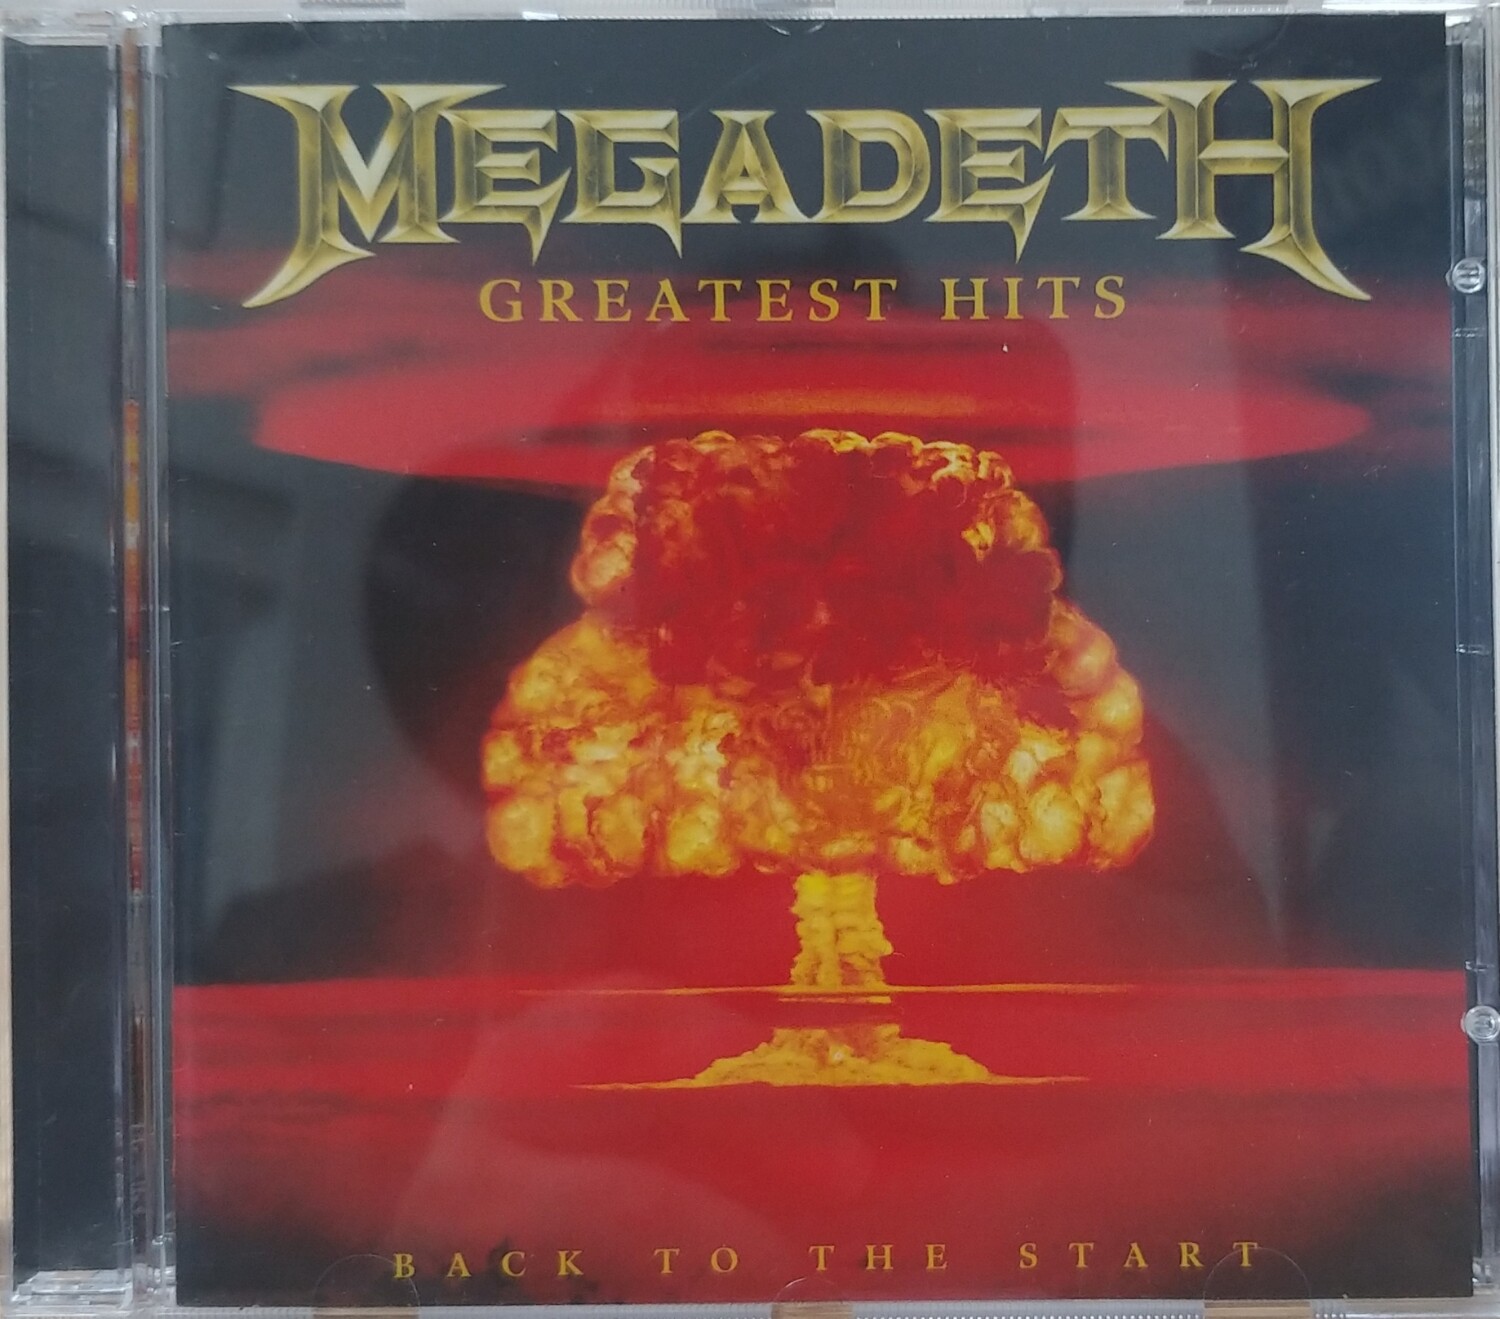 Megadeth - Greatest Hits Back to The Start (CD)